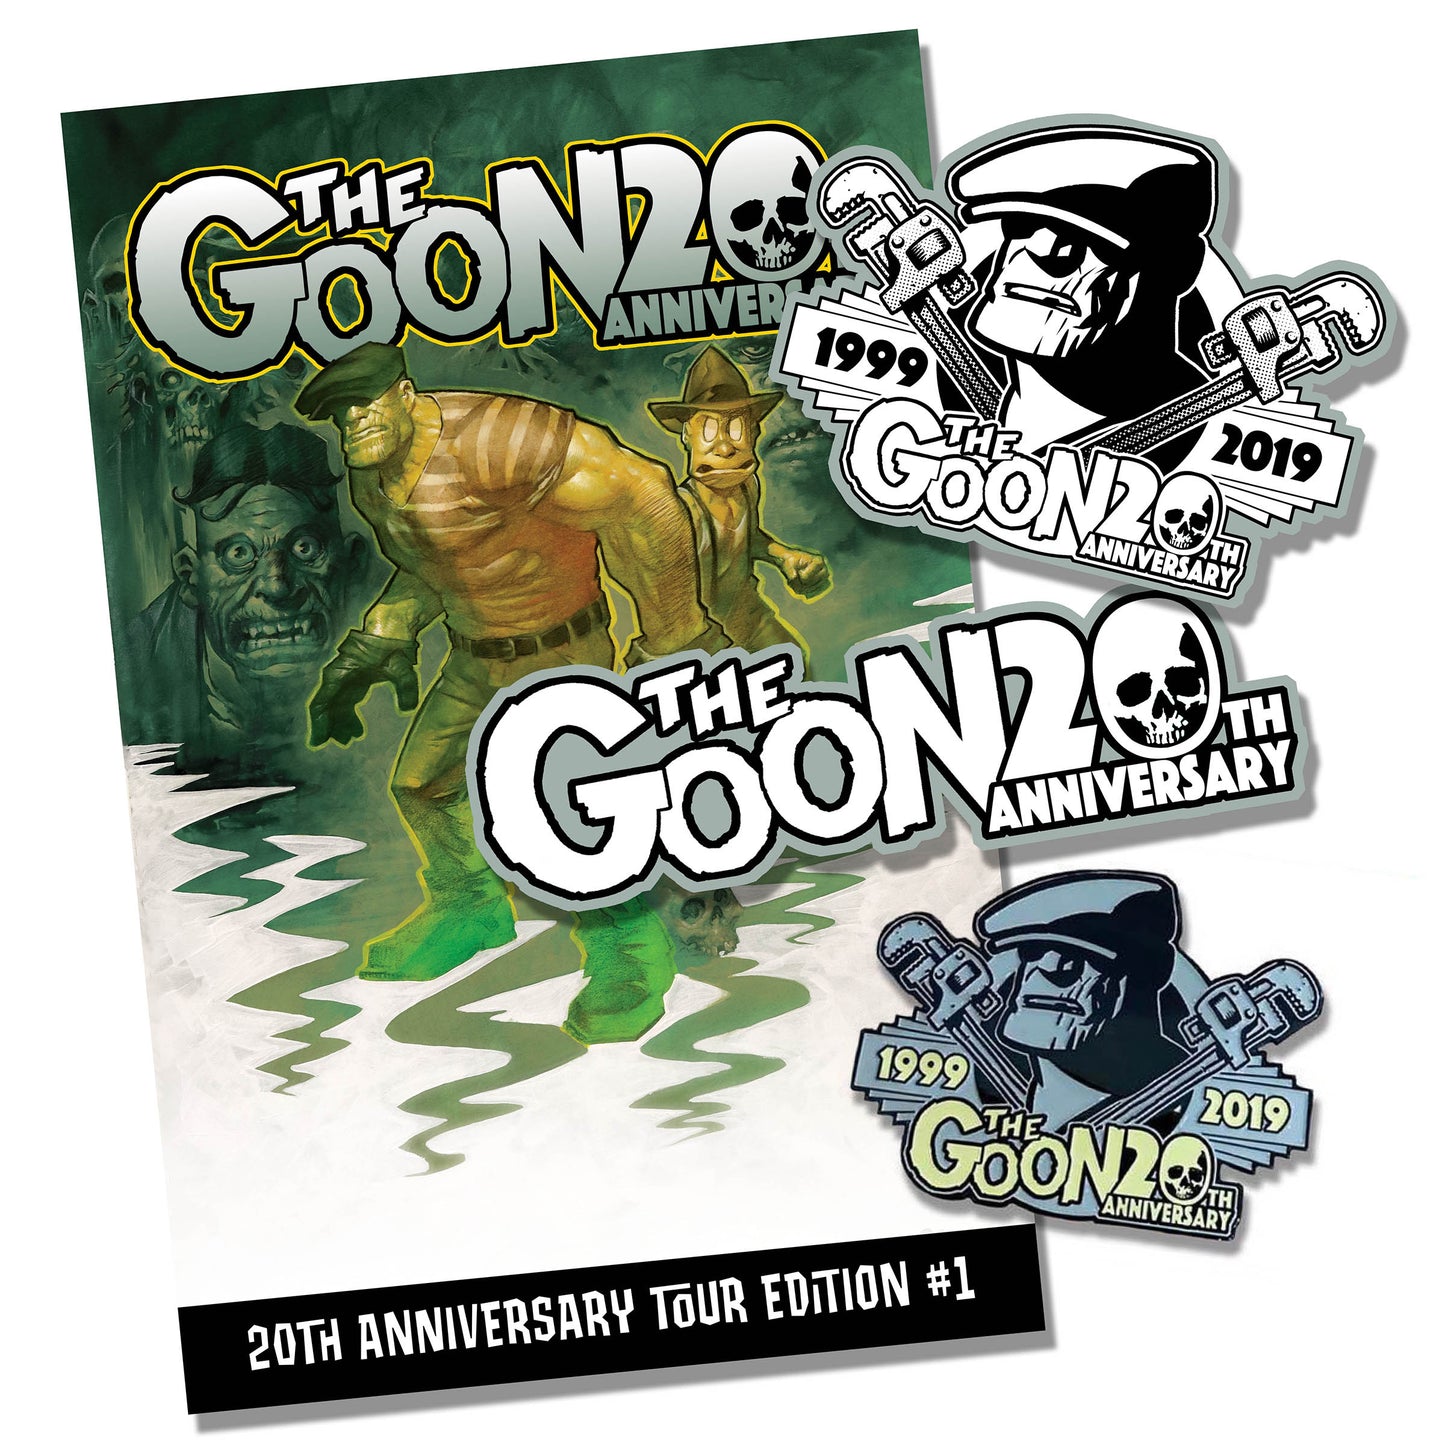 The Goon 20th Anniversary Package deal!!